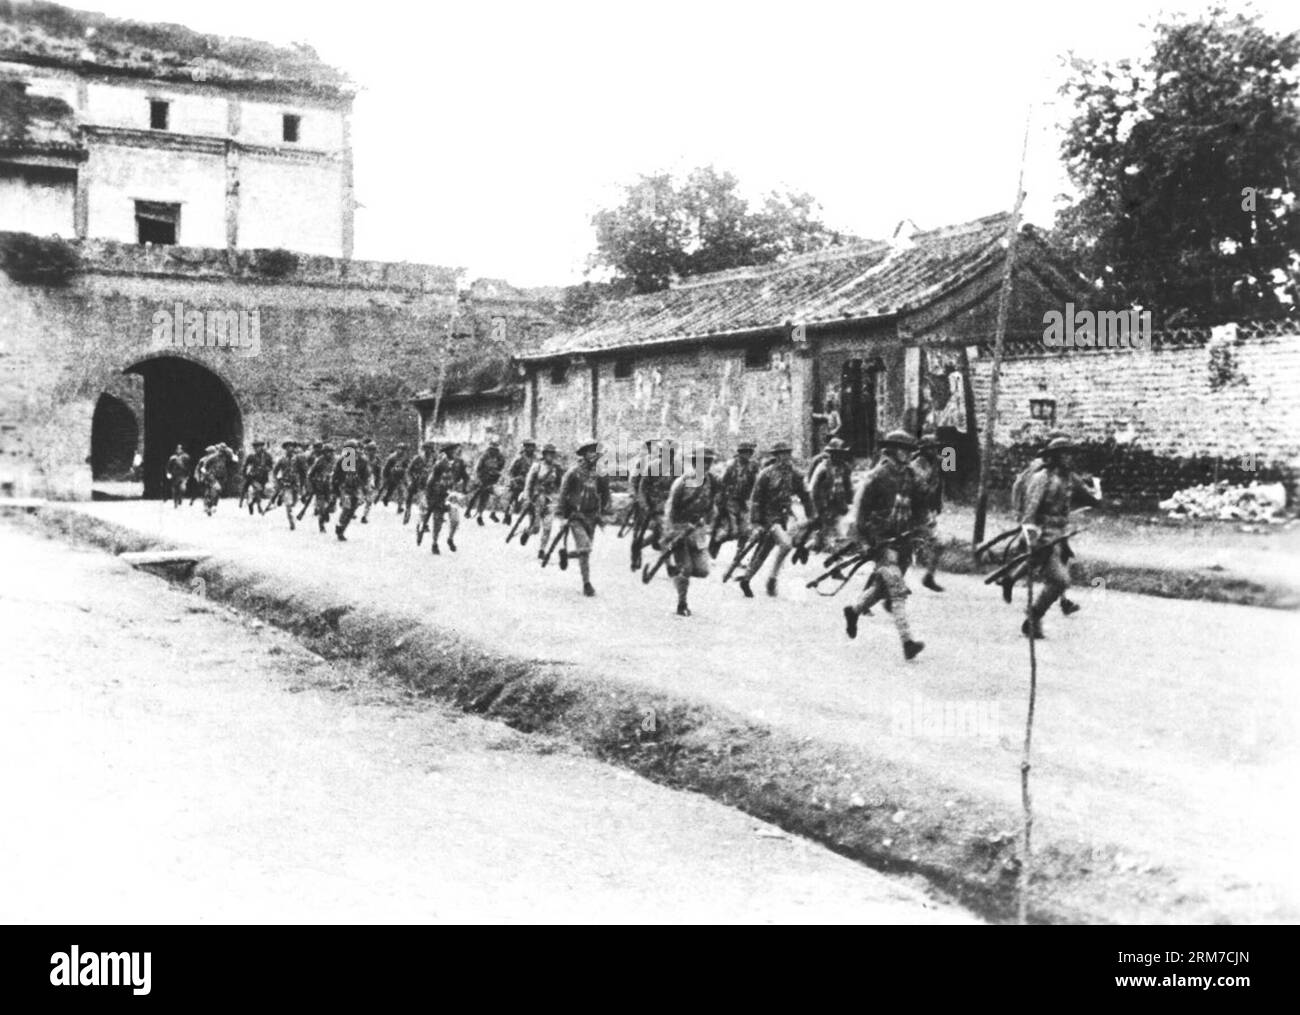 (140225) -- BEIJING, (Xinhua) -- File photo taken in 1937 shows Chinese troops running to Lugou Bridge to fight against Japanese aggressors. Chinese lawmakers are mulling making December 13 a national memorial day to commemorate those killed by Japanese aggressors during the Nanjing Massacre. The draft decision will be discussed at the bi-monthly session of the Standing Committee of the National People s Congress (NPC) which runs from Tuesday through Thursday. Japanese troops started the massacre in Nanjing on Dec. 13, 1937, killing more than 300,000 people in the following 40-odd days. (Xinhu Stock Photo